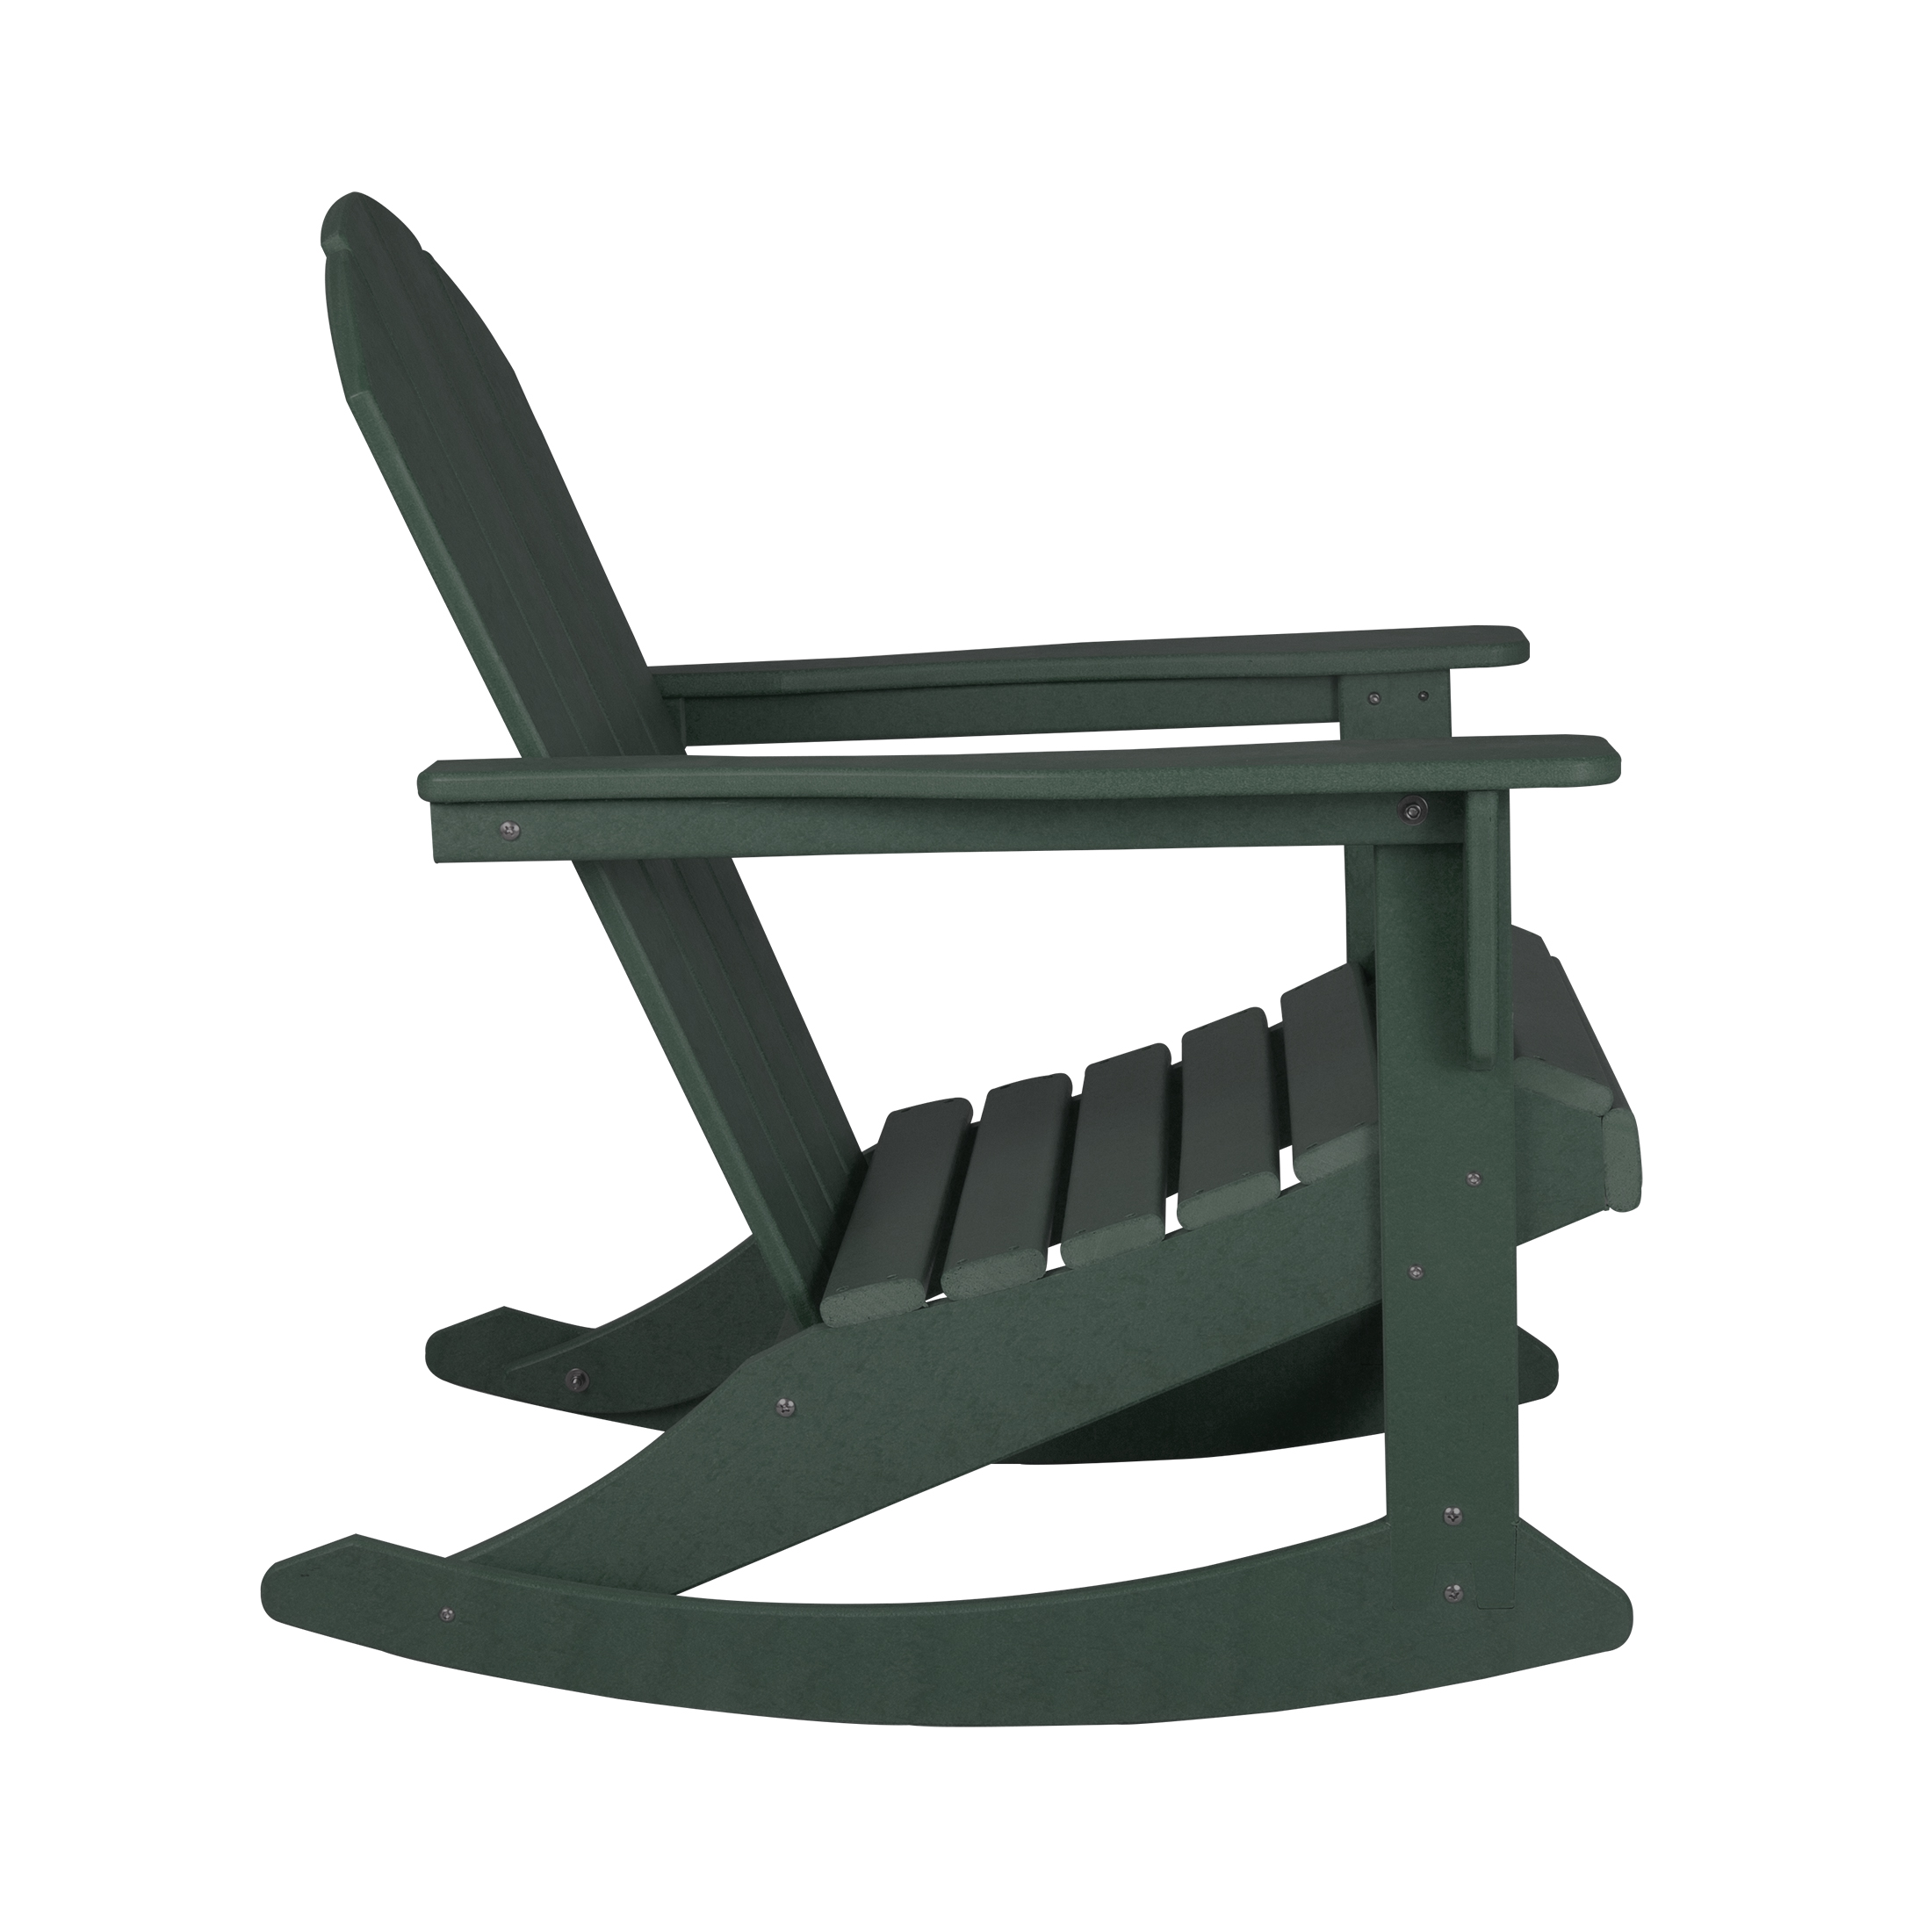 GARDEN Plastic Adirondack Rocking Chair for Outdoor Patio Porch Seating, Dark Green - image 4 of 7